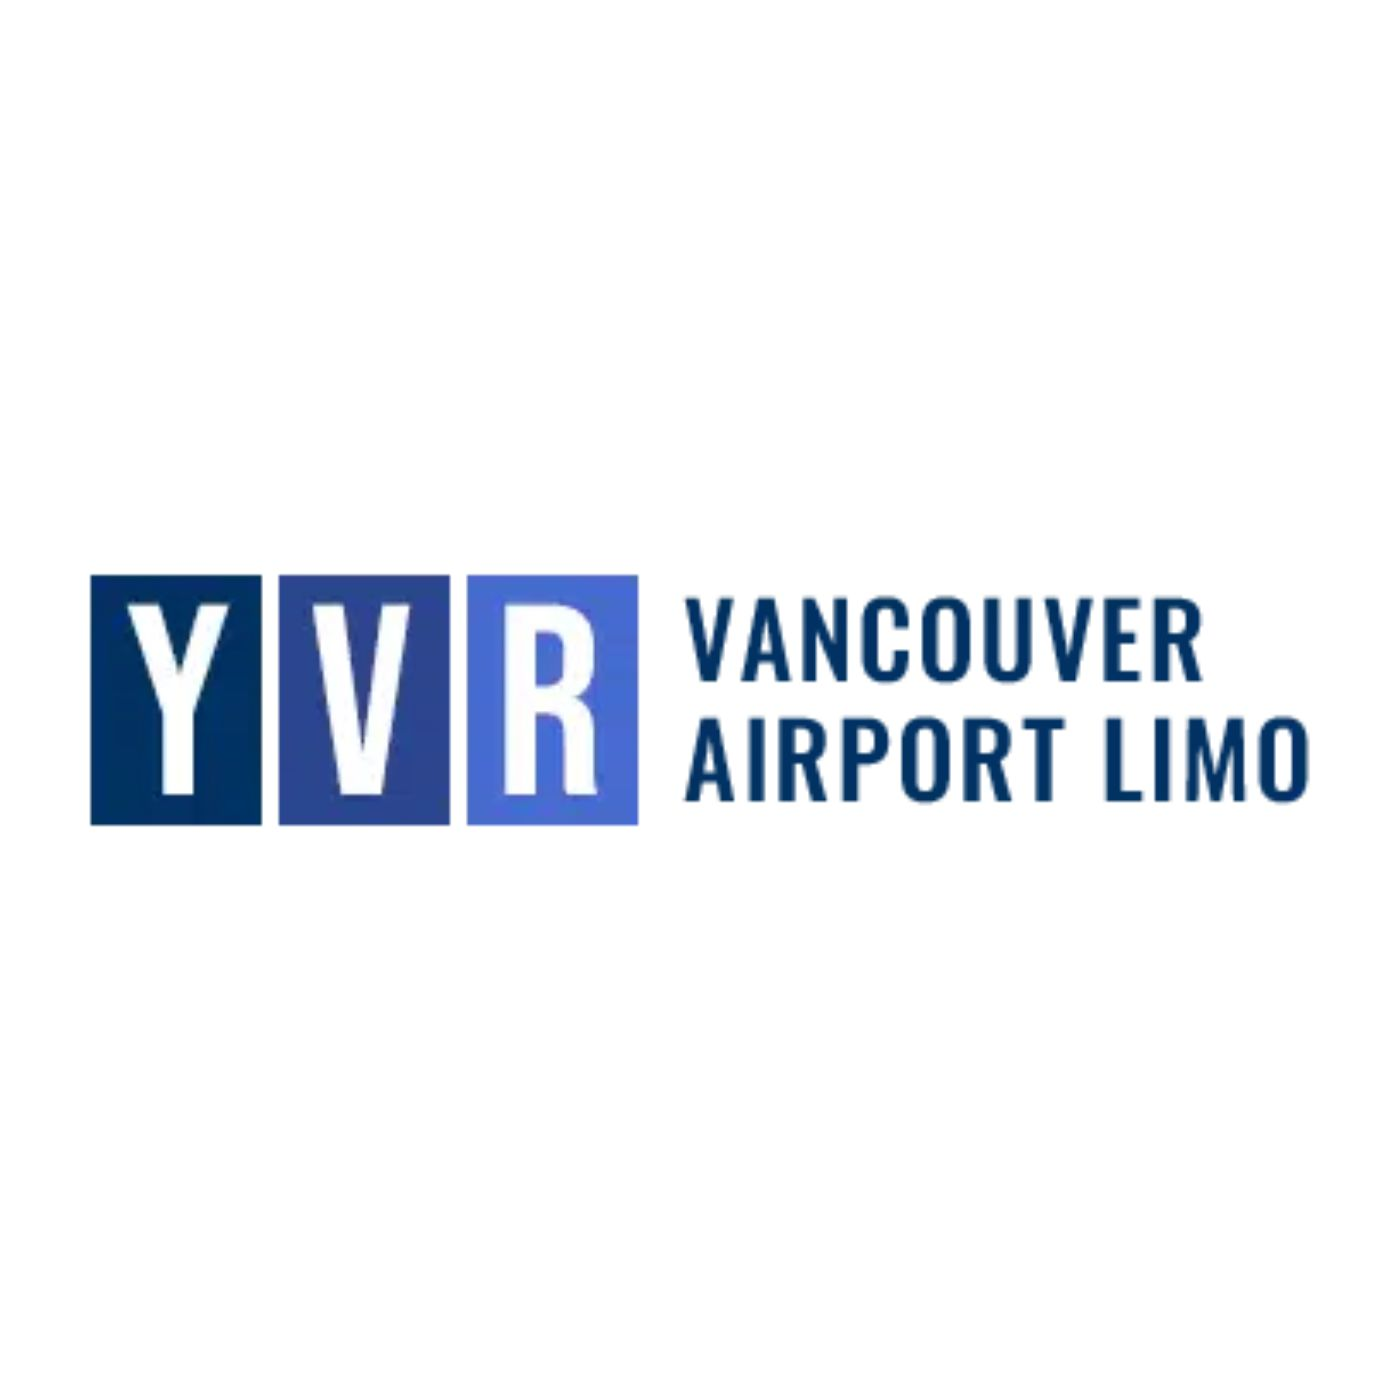 Vancouver Airport Limo'